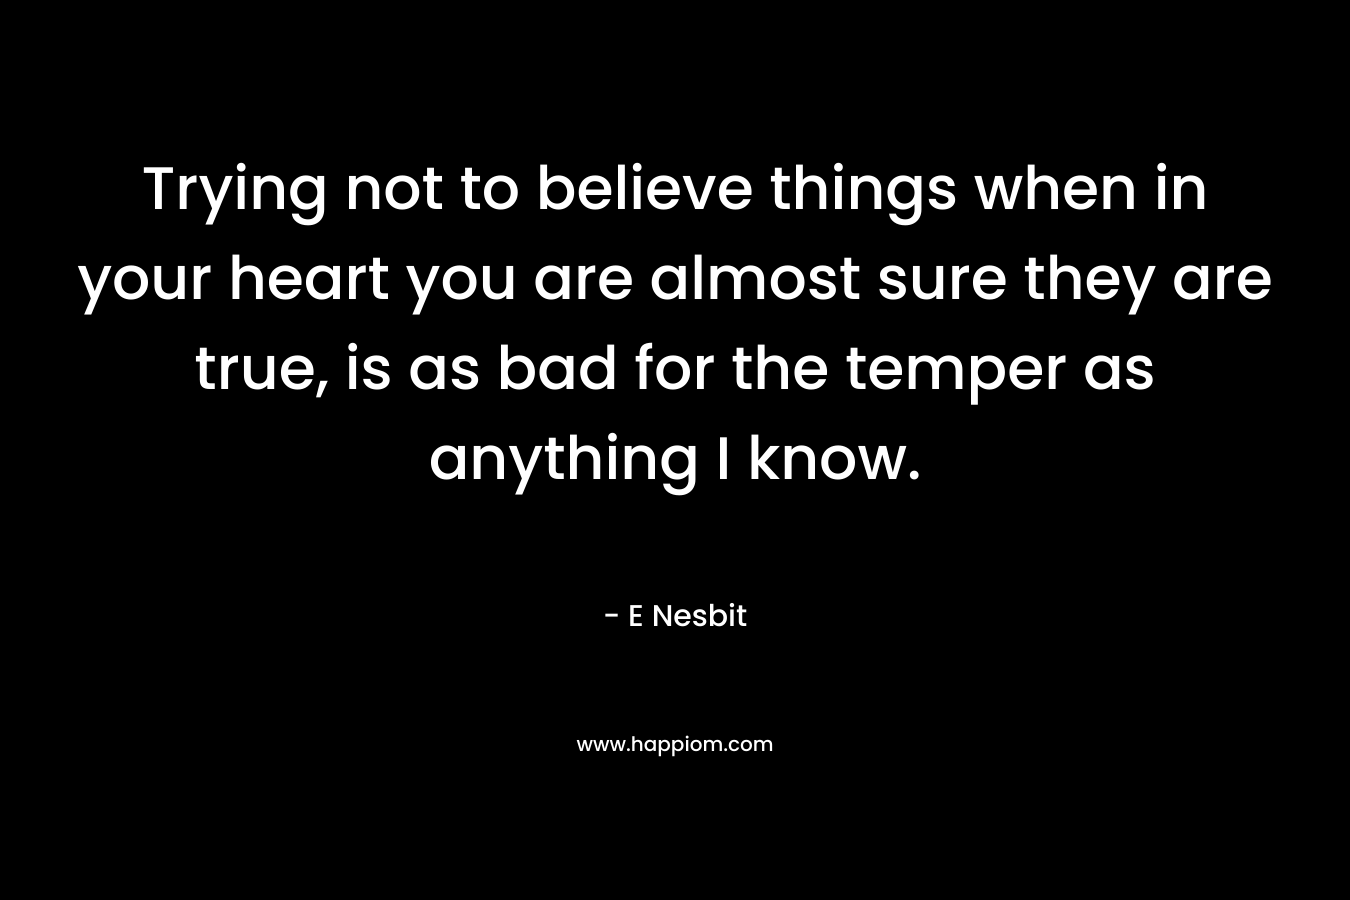 Trying not to believe things when in your heart you are almost sure they are true, is as bad for the temper as anything I know. – E Nesbit